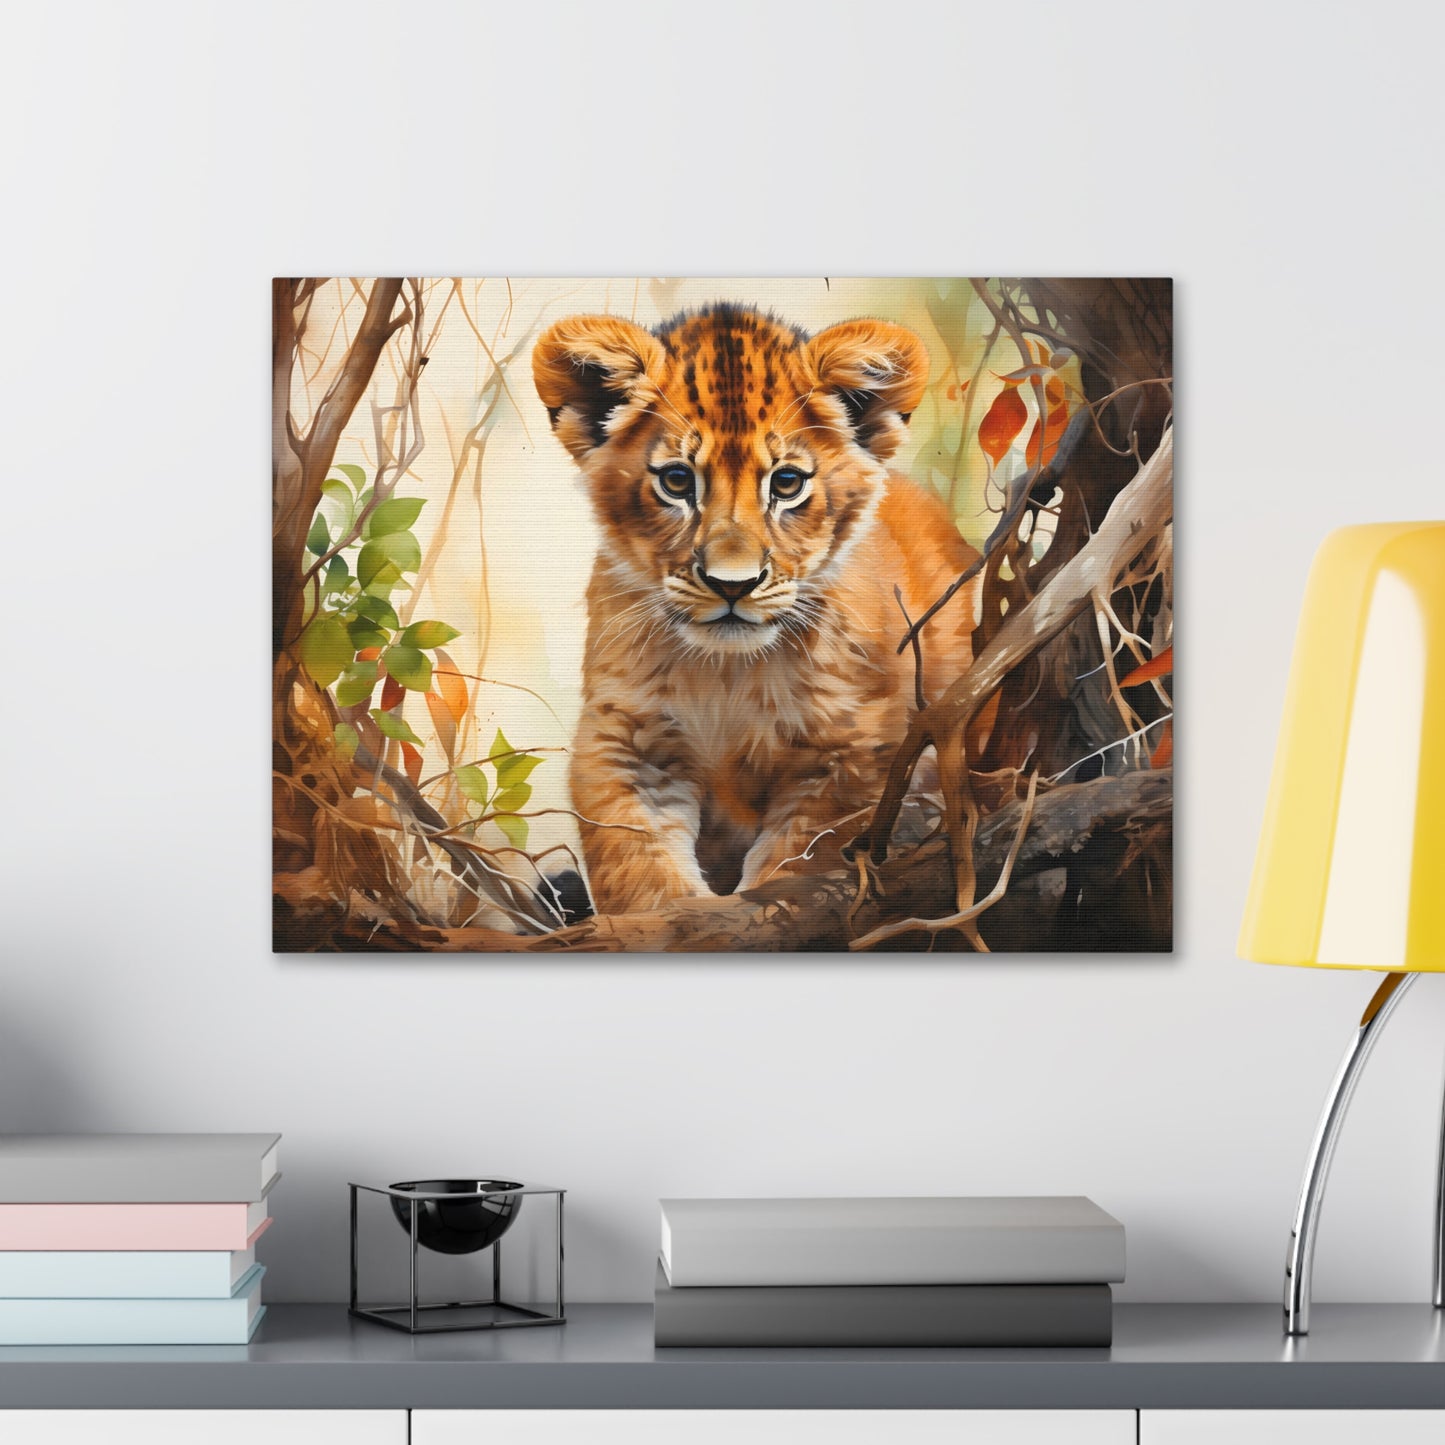 Watercolor Baby Lion In Nature Art Canvas Gallery Wraps Baby Lion Print Large Canvas Art Animal Wall Art minimalist Wall Art Lover Gift